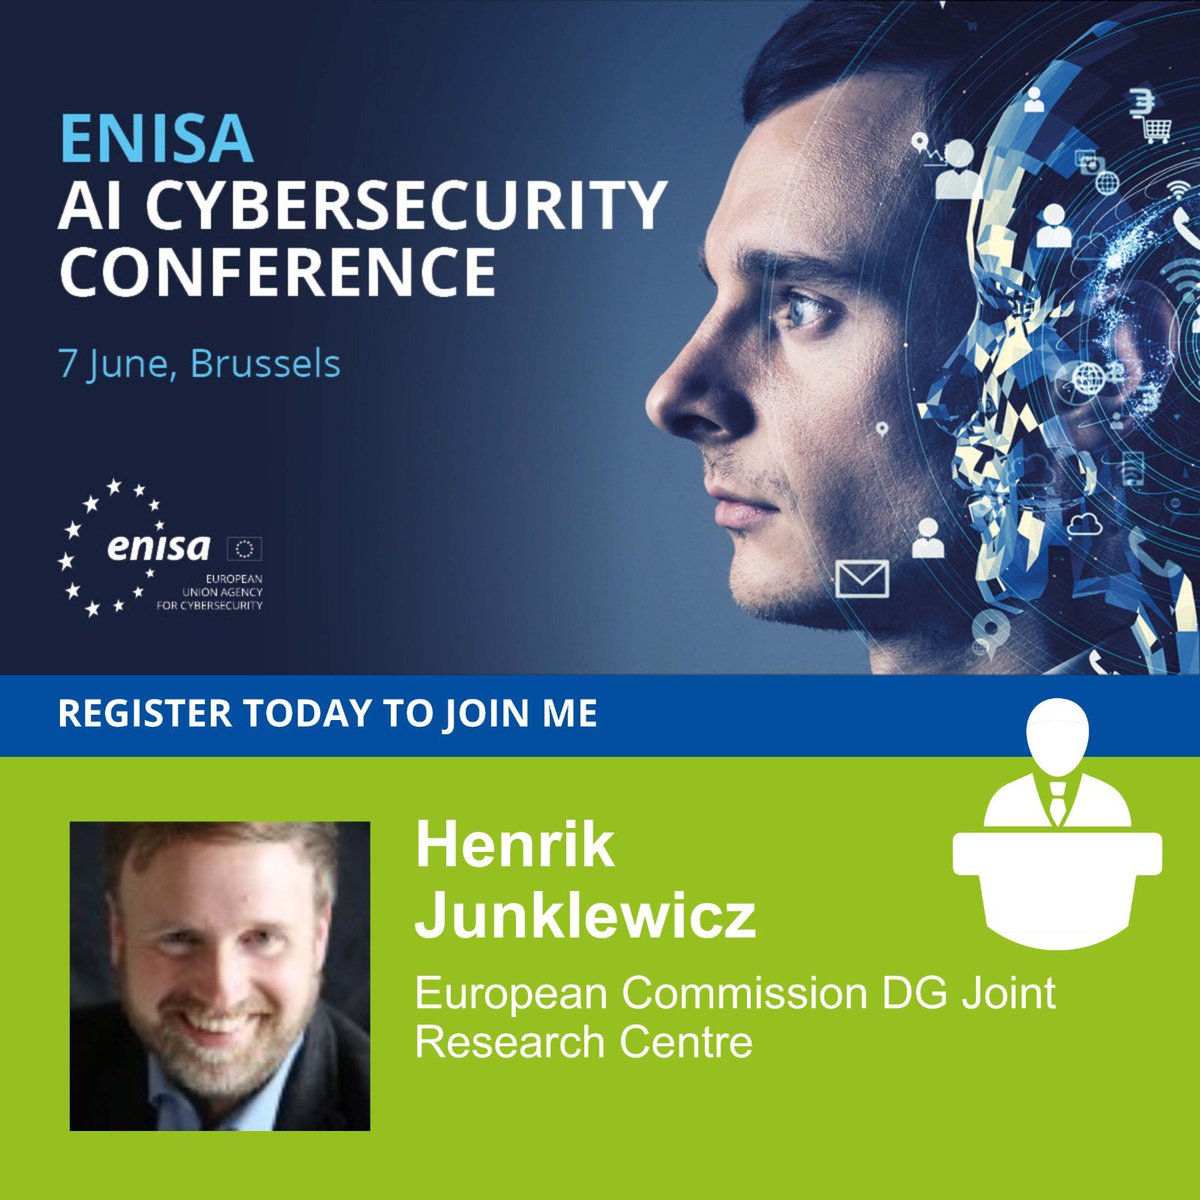 📣 Join us in #Brussels at the European Union Agency for Cybersecurity (@enisa_eu) Artificial Intelligence #AI #Cybersecurity Conference on June 7🇪🇺 In person seats sold out, but you can register online 👉 enisa.europa.eu/events/ai-cybe… #TrustworthyAI #SecureAI #FuturesThinkingApplied